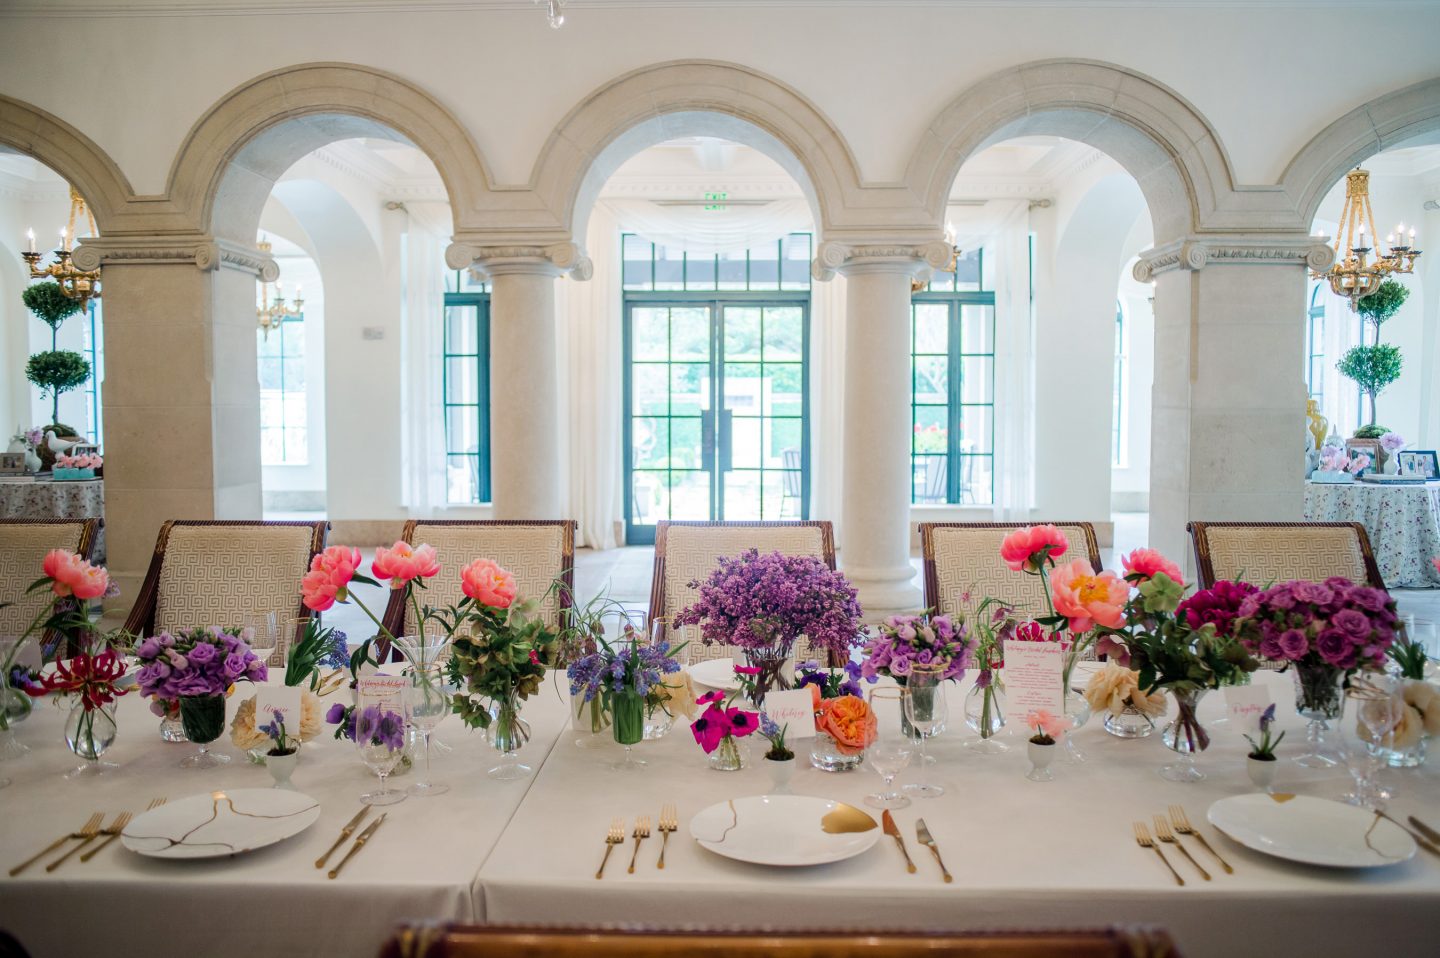 Floral table decor at Sea Island wedding weekend in Georgia, USA | Photo by Liz Banfield